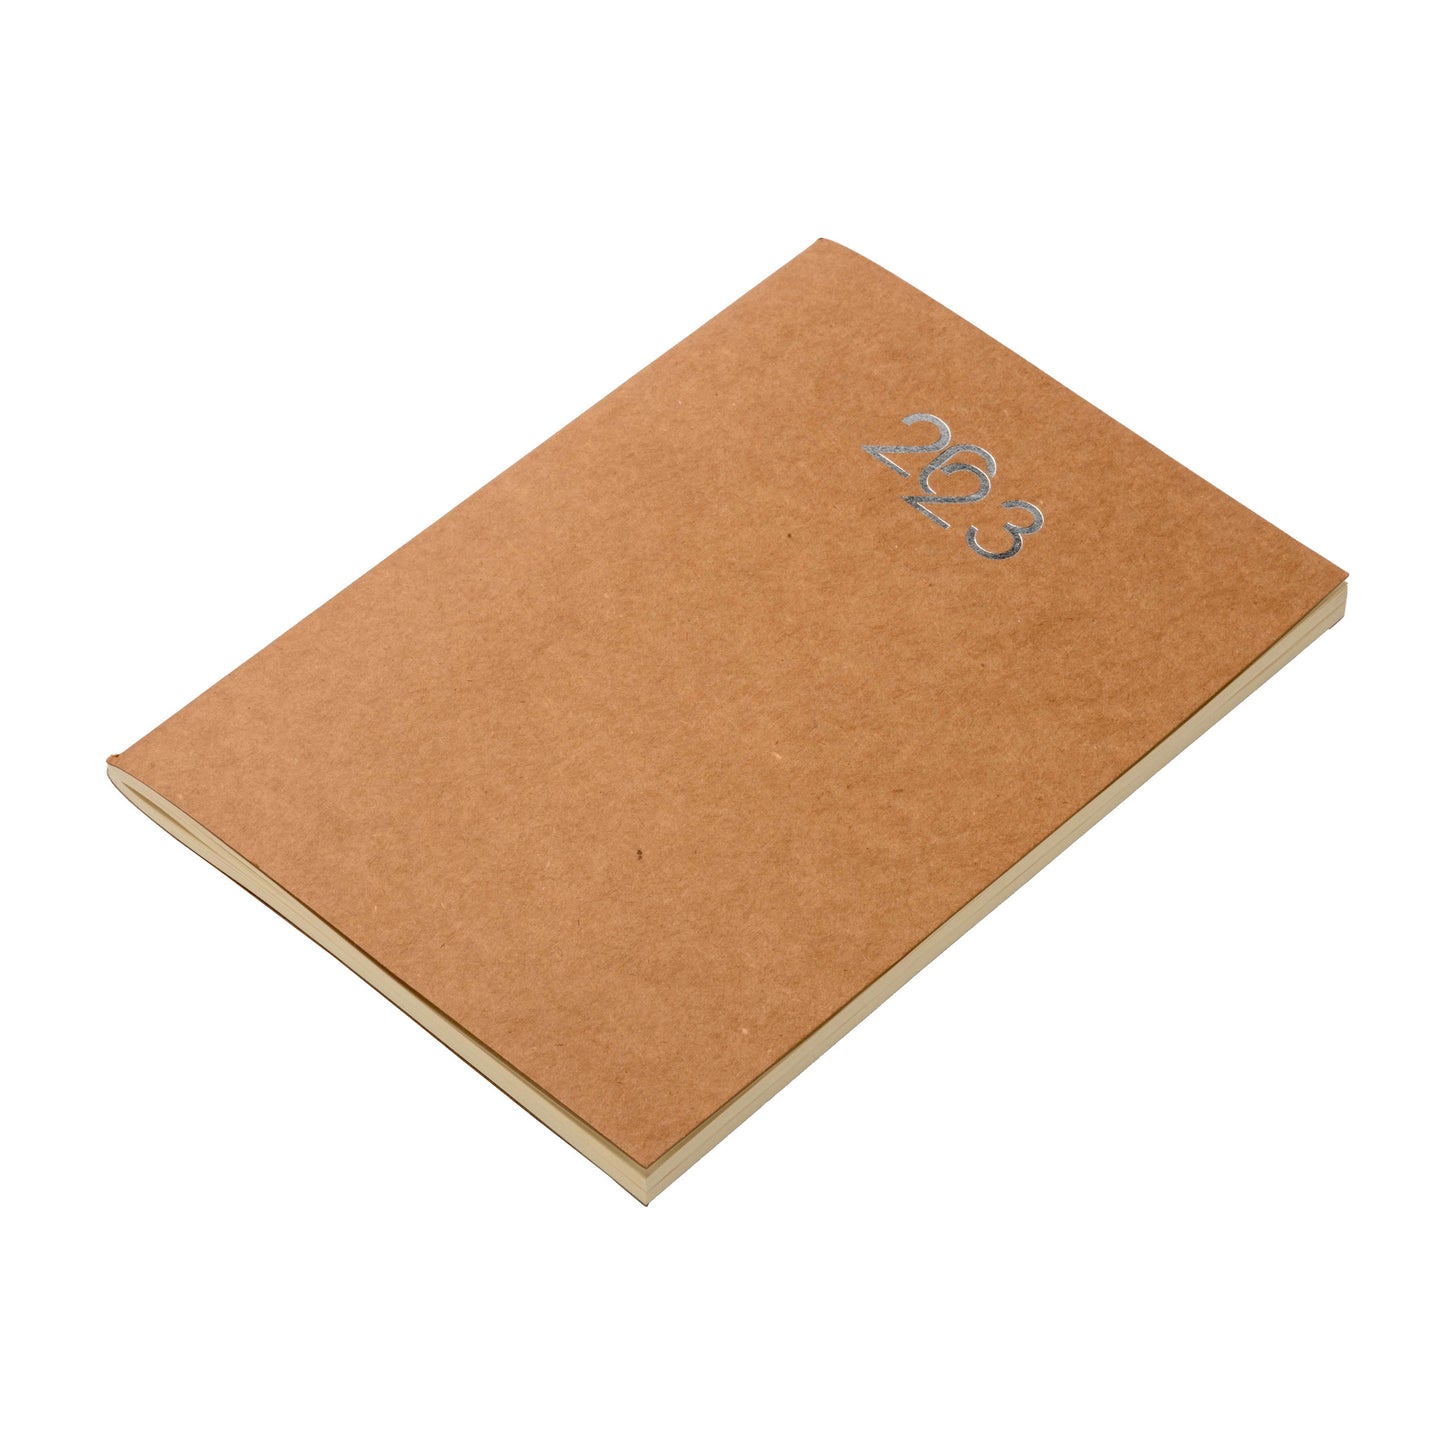 2023 weekly diary in "craft" cardboard with soft cover 13.8 X 20.4 CM